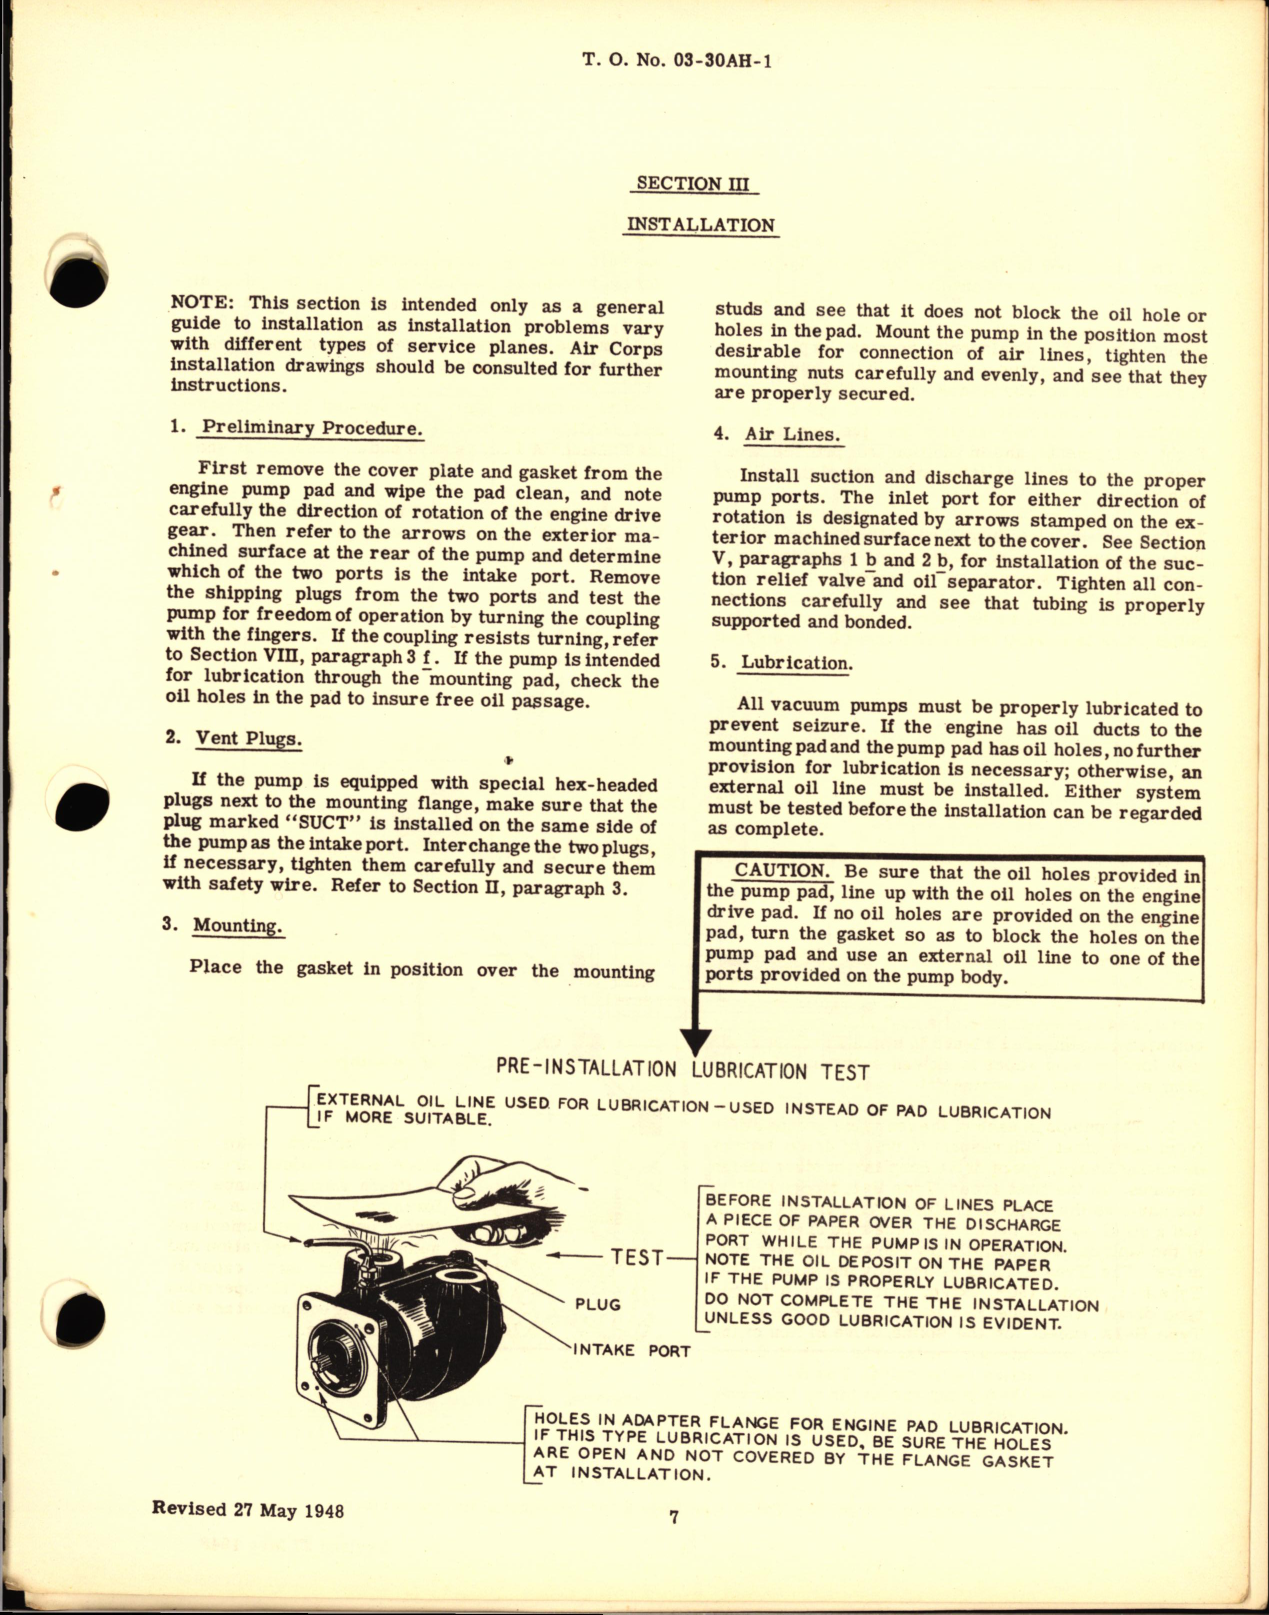 Sample page 5 from AirCorps Library document: Operation, Service and Overhaul Instructions with Parts Catalog for Engine-Driven Vacuum Pumps